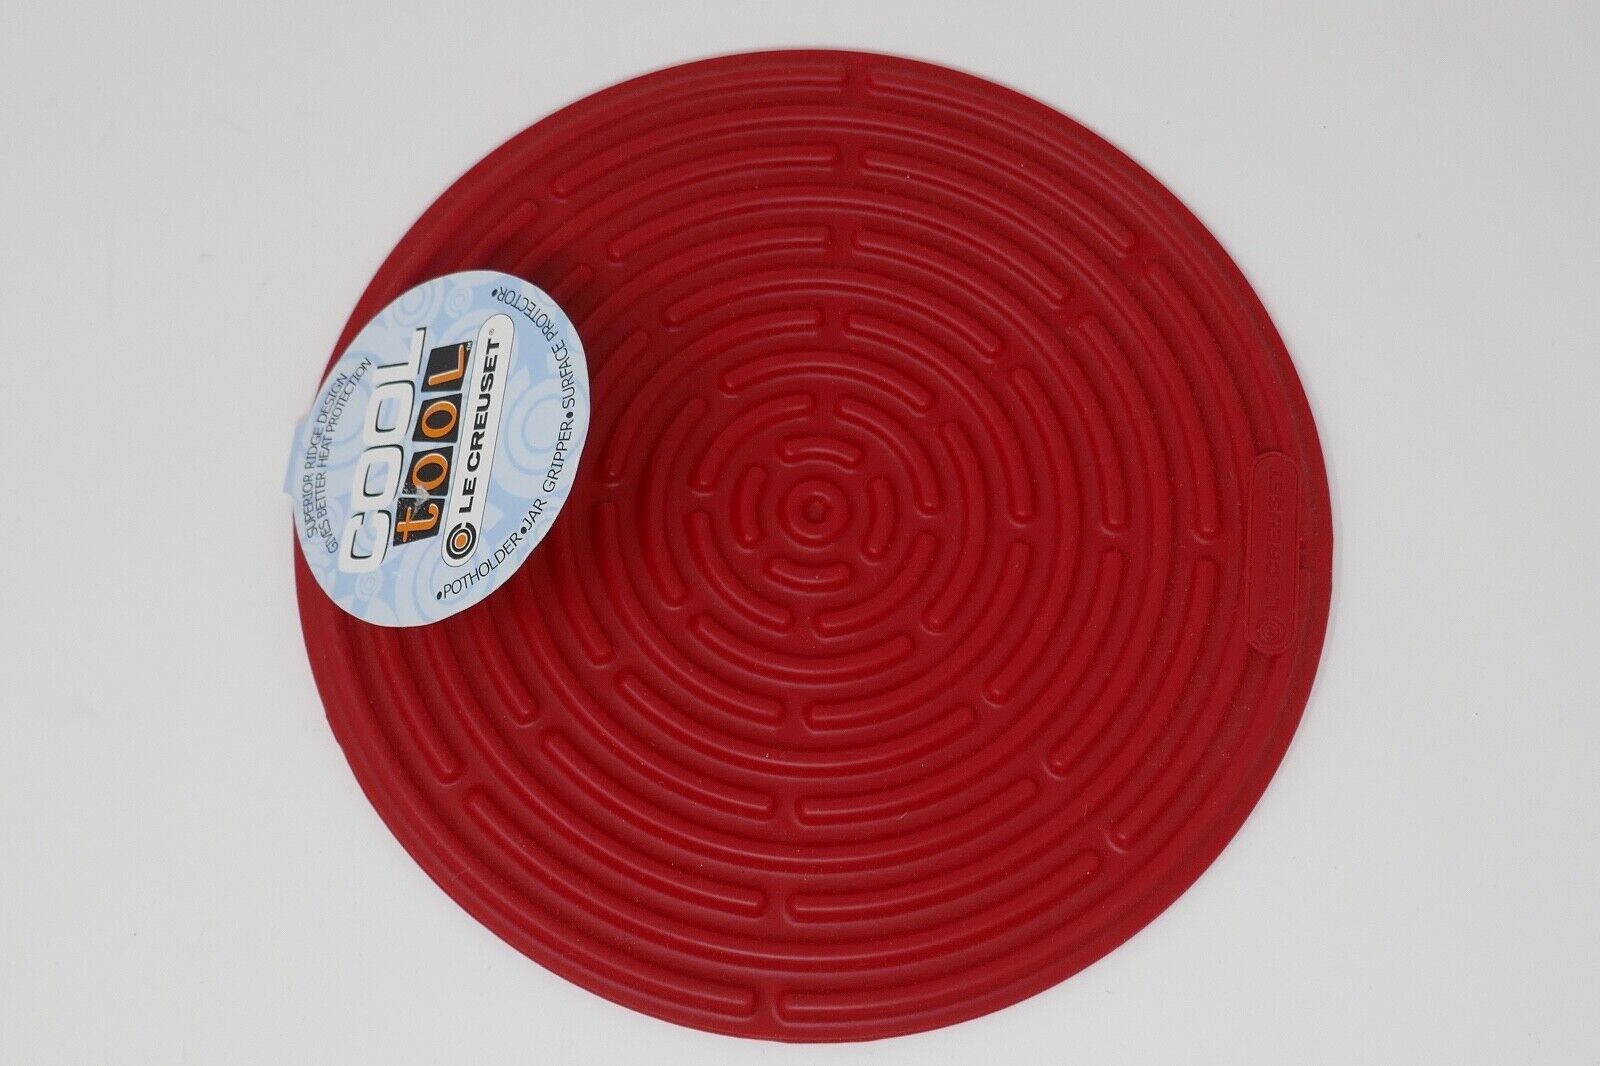 Le Creuset 8" Red Round Silicone Mini Cool Tool Trivet Coaster Gripper Holder - $34.99